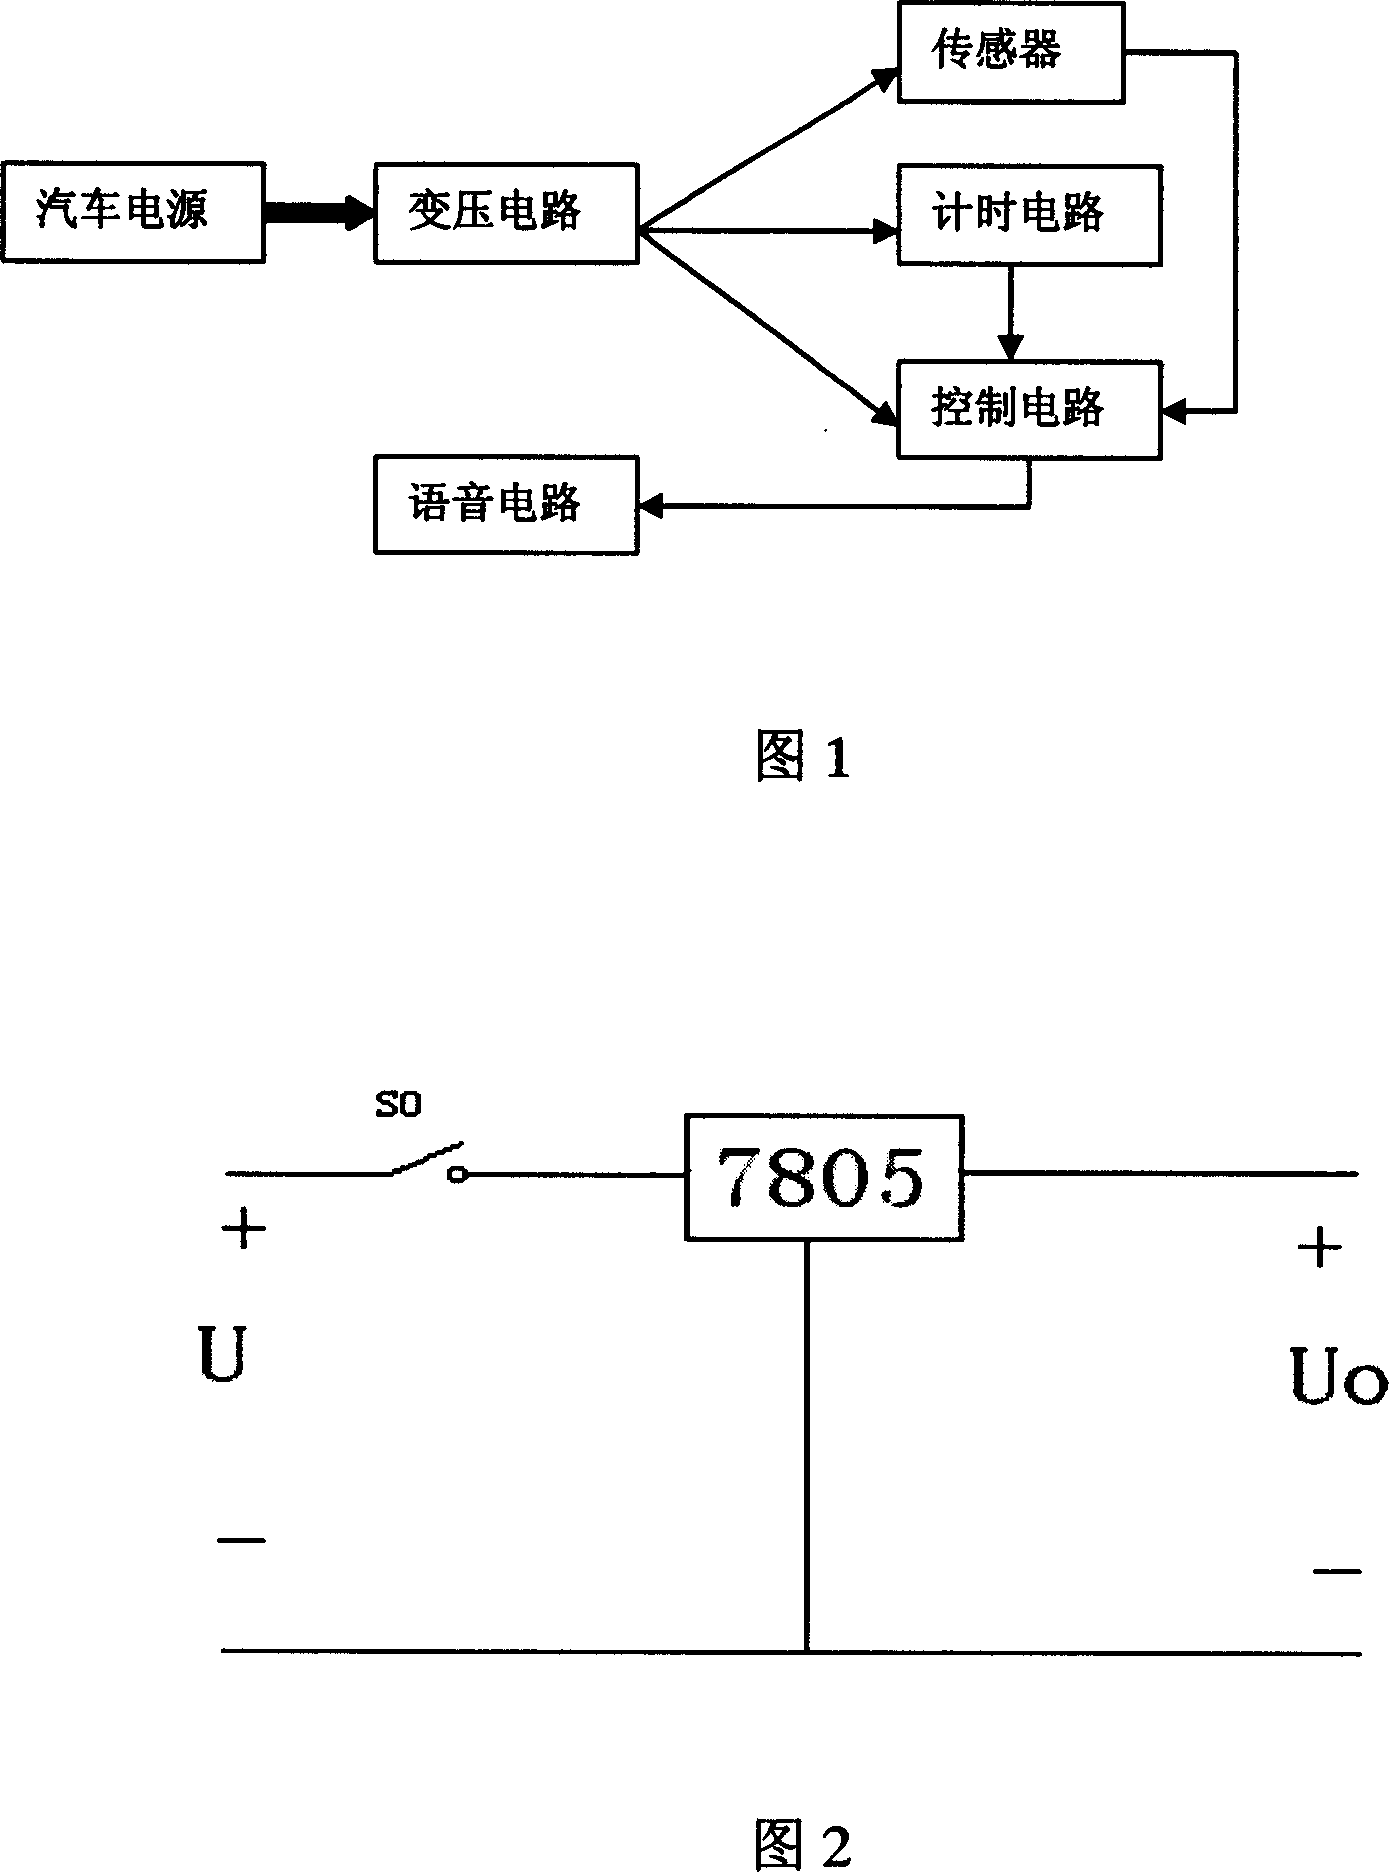 Fatigue drive prompting device